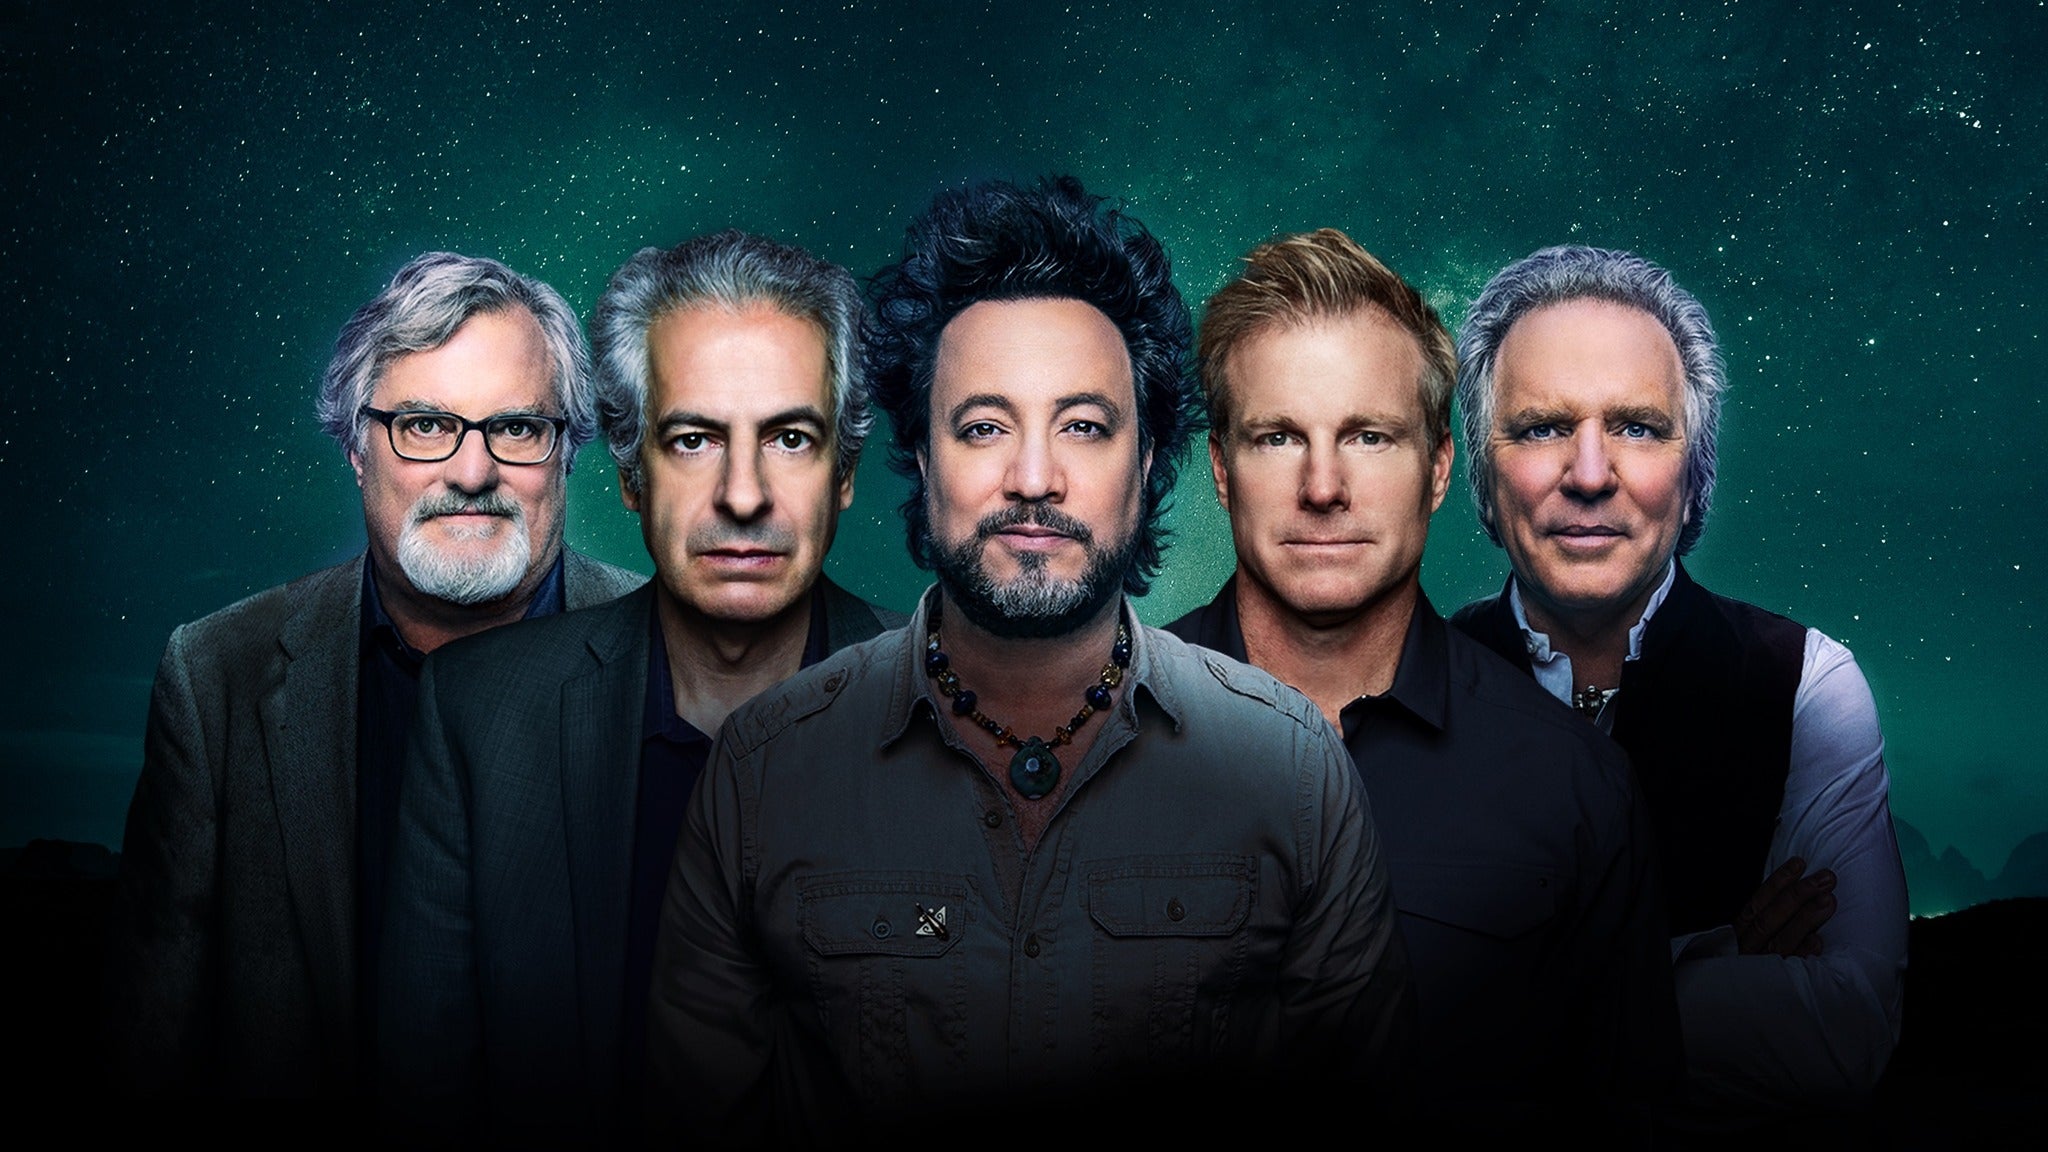 Ancient Aliens Live presale code for early tickets in Tulsa